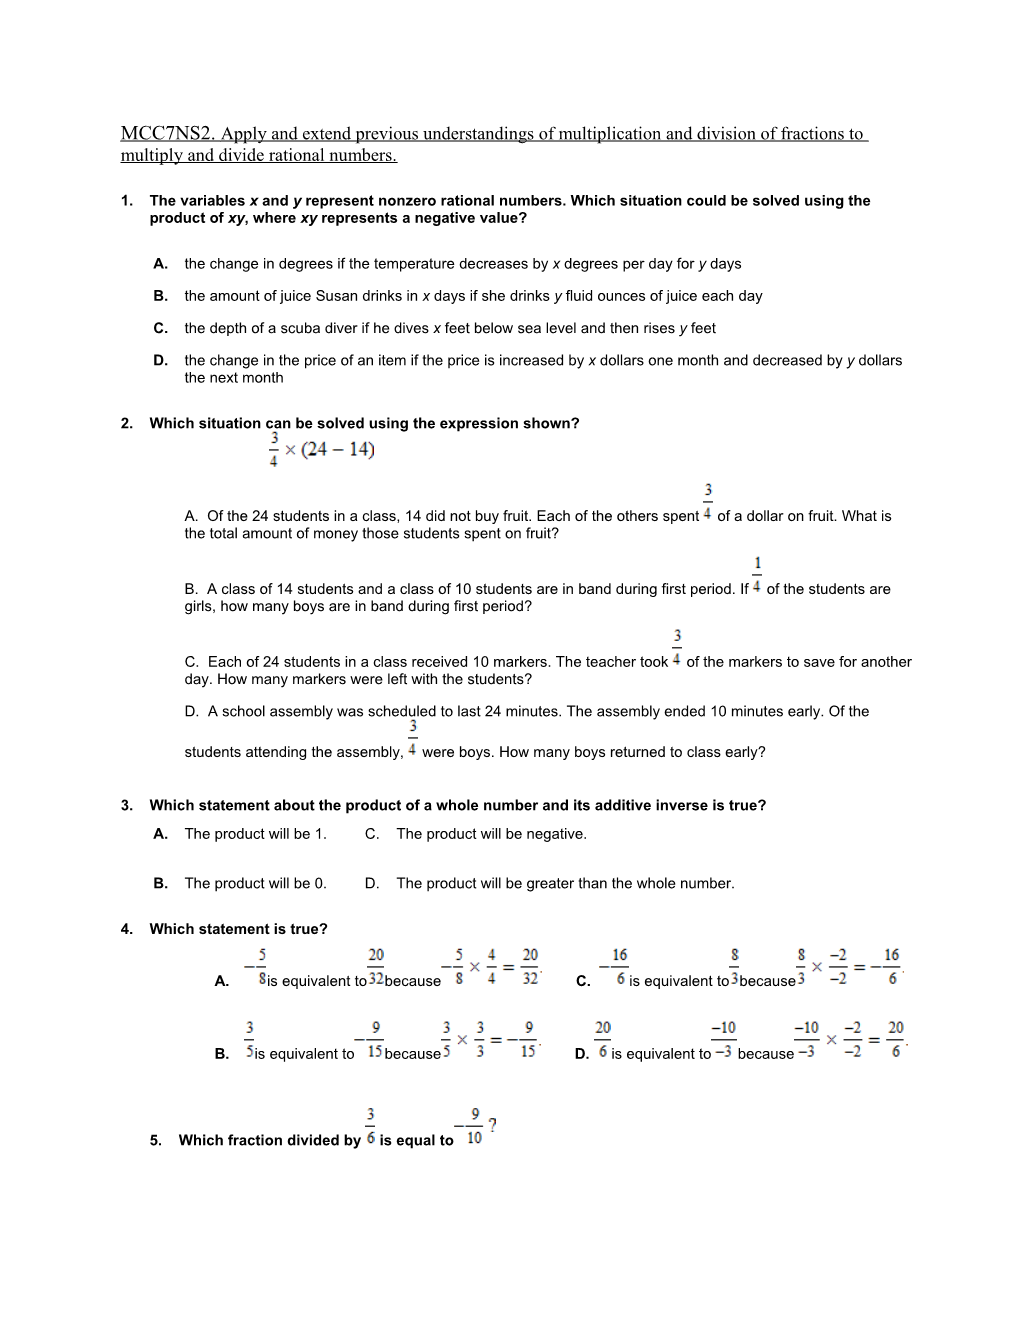 MCC7NS2. Apply and Extend Previous Understandings of Multiplication and Division of Fractions